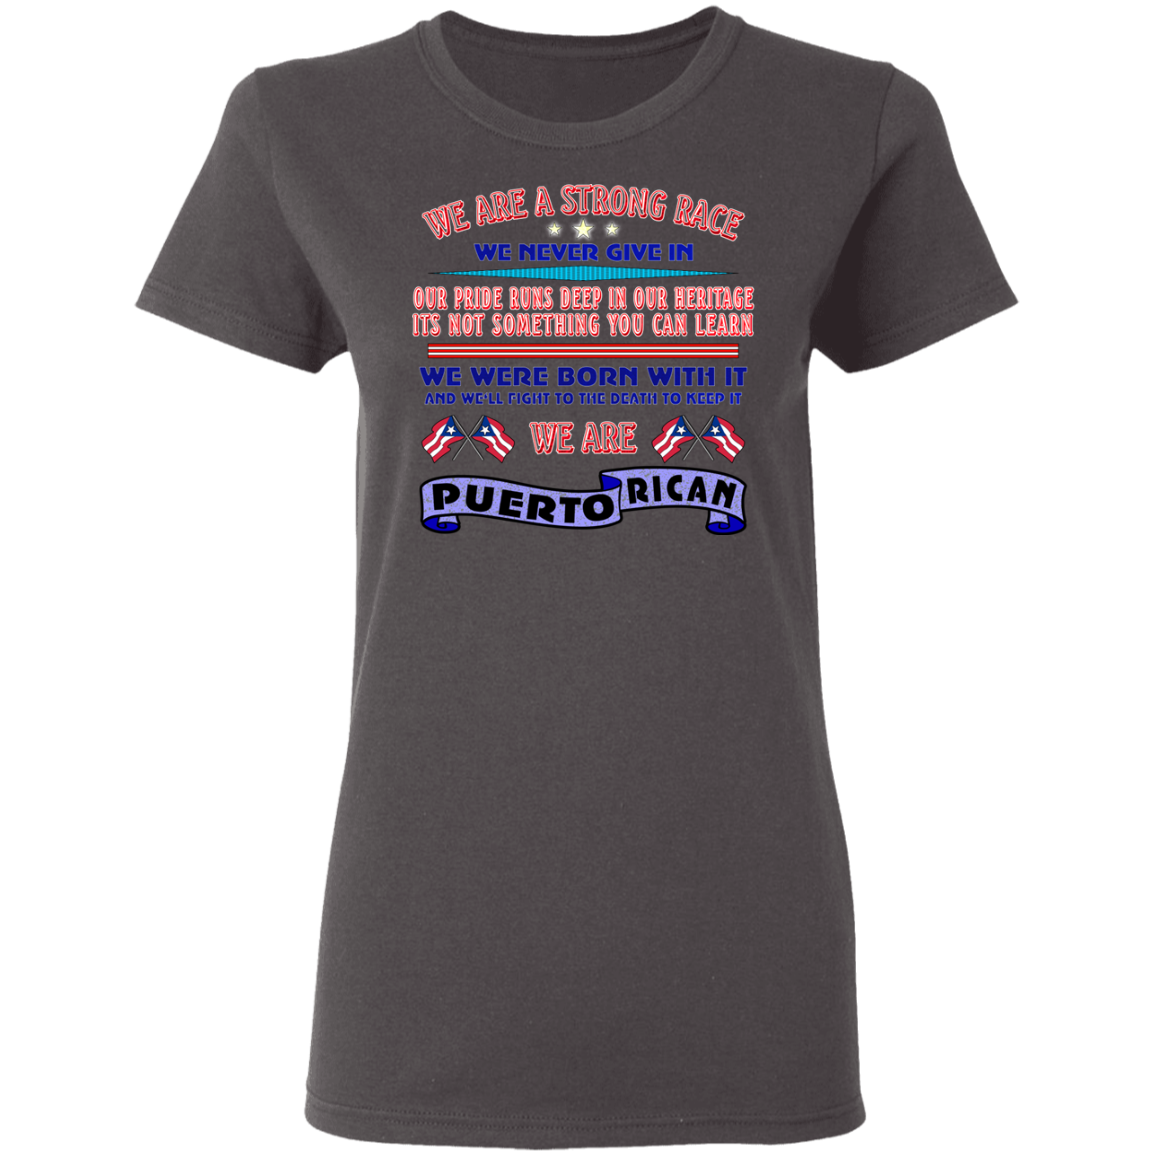 WE ARE Strong Ladies' 5.3 oz. T-Shirt - Puerto Rican Pride